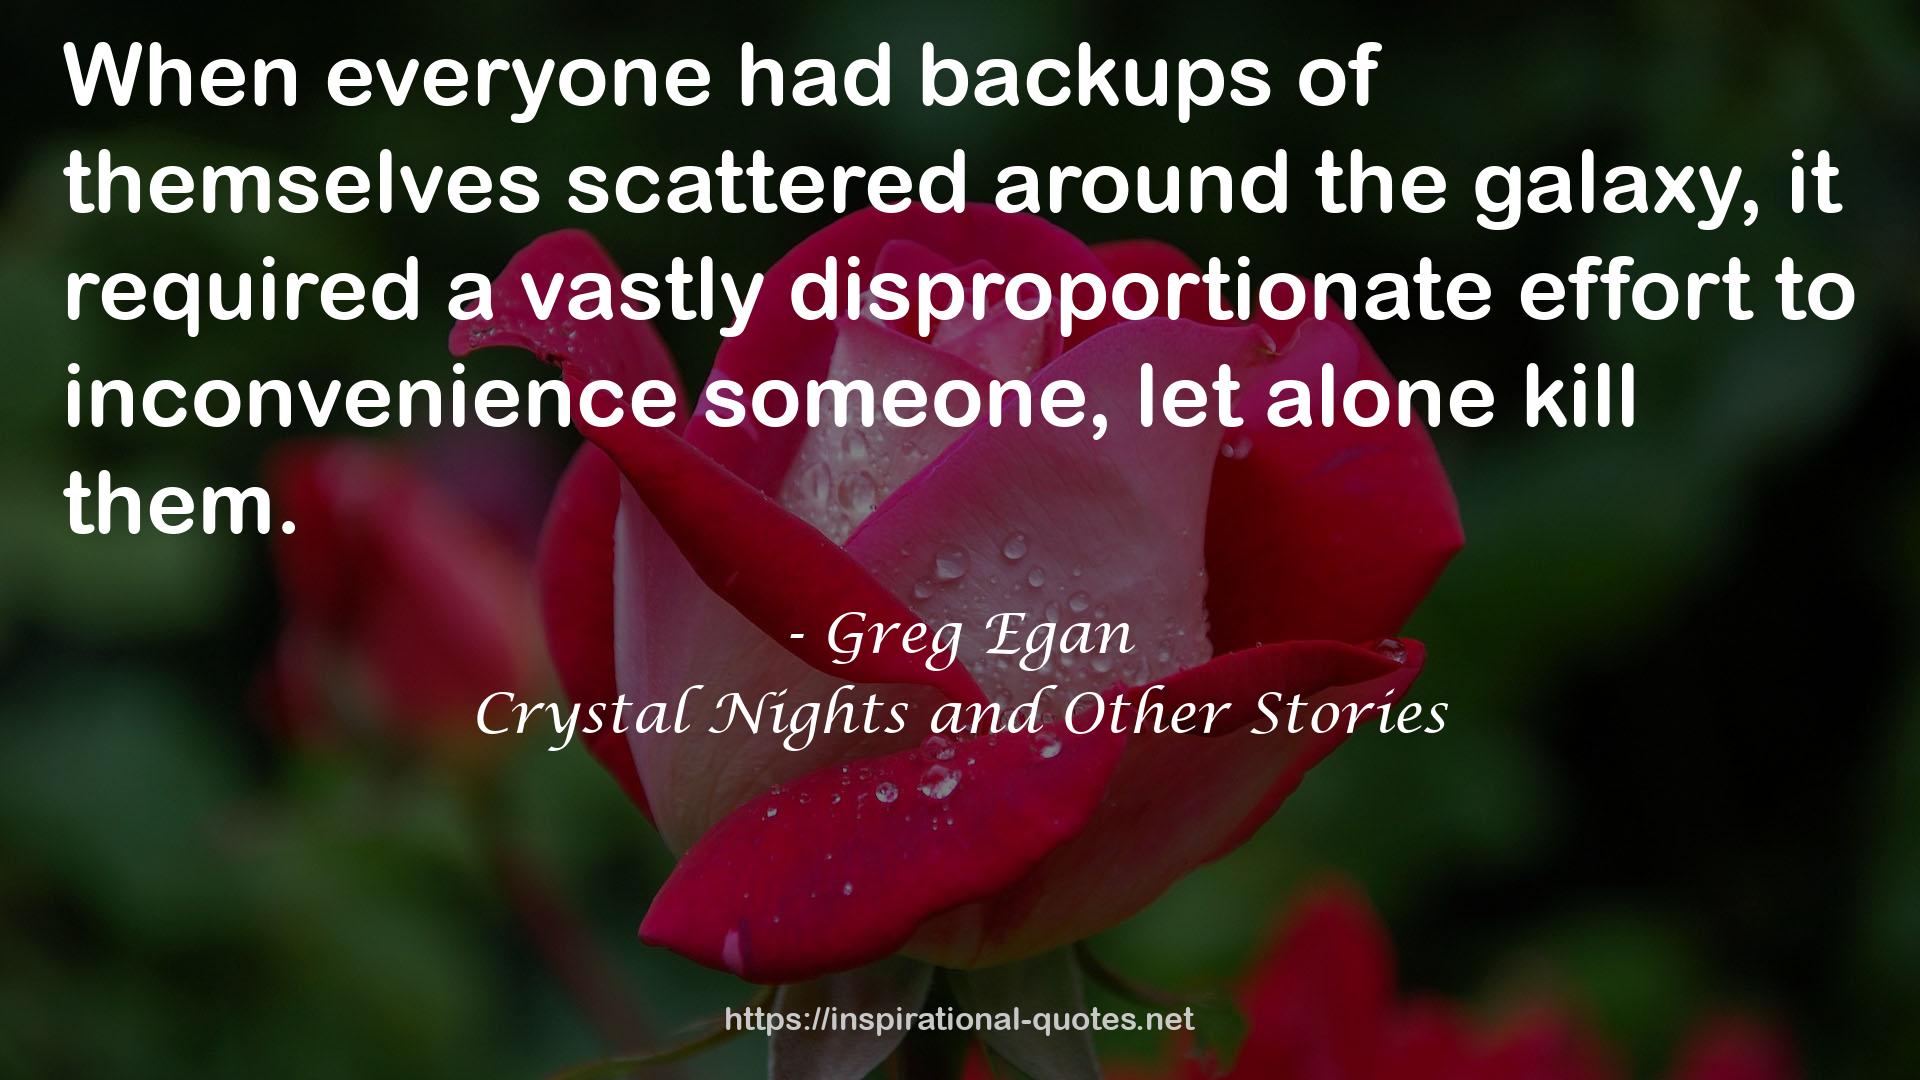 Crystal Nights and Other Stories QUOTES